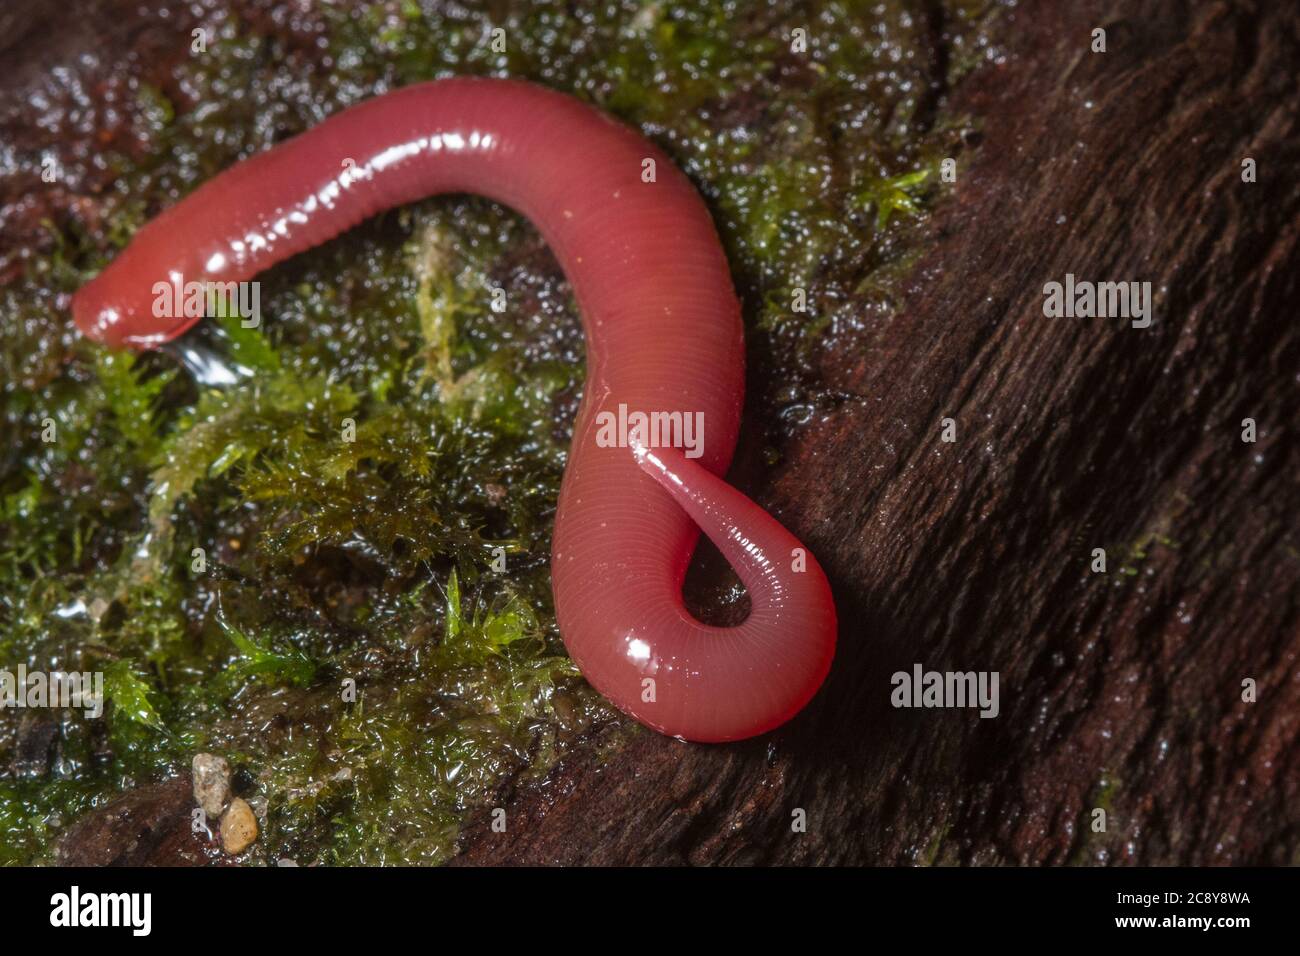 Kinabalu giant red leech (Mimobdella buettikoferi) a huge predatory leech found in the forests of Mount Kinabalu National park in Sabah, Borneo. Stock Photo